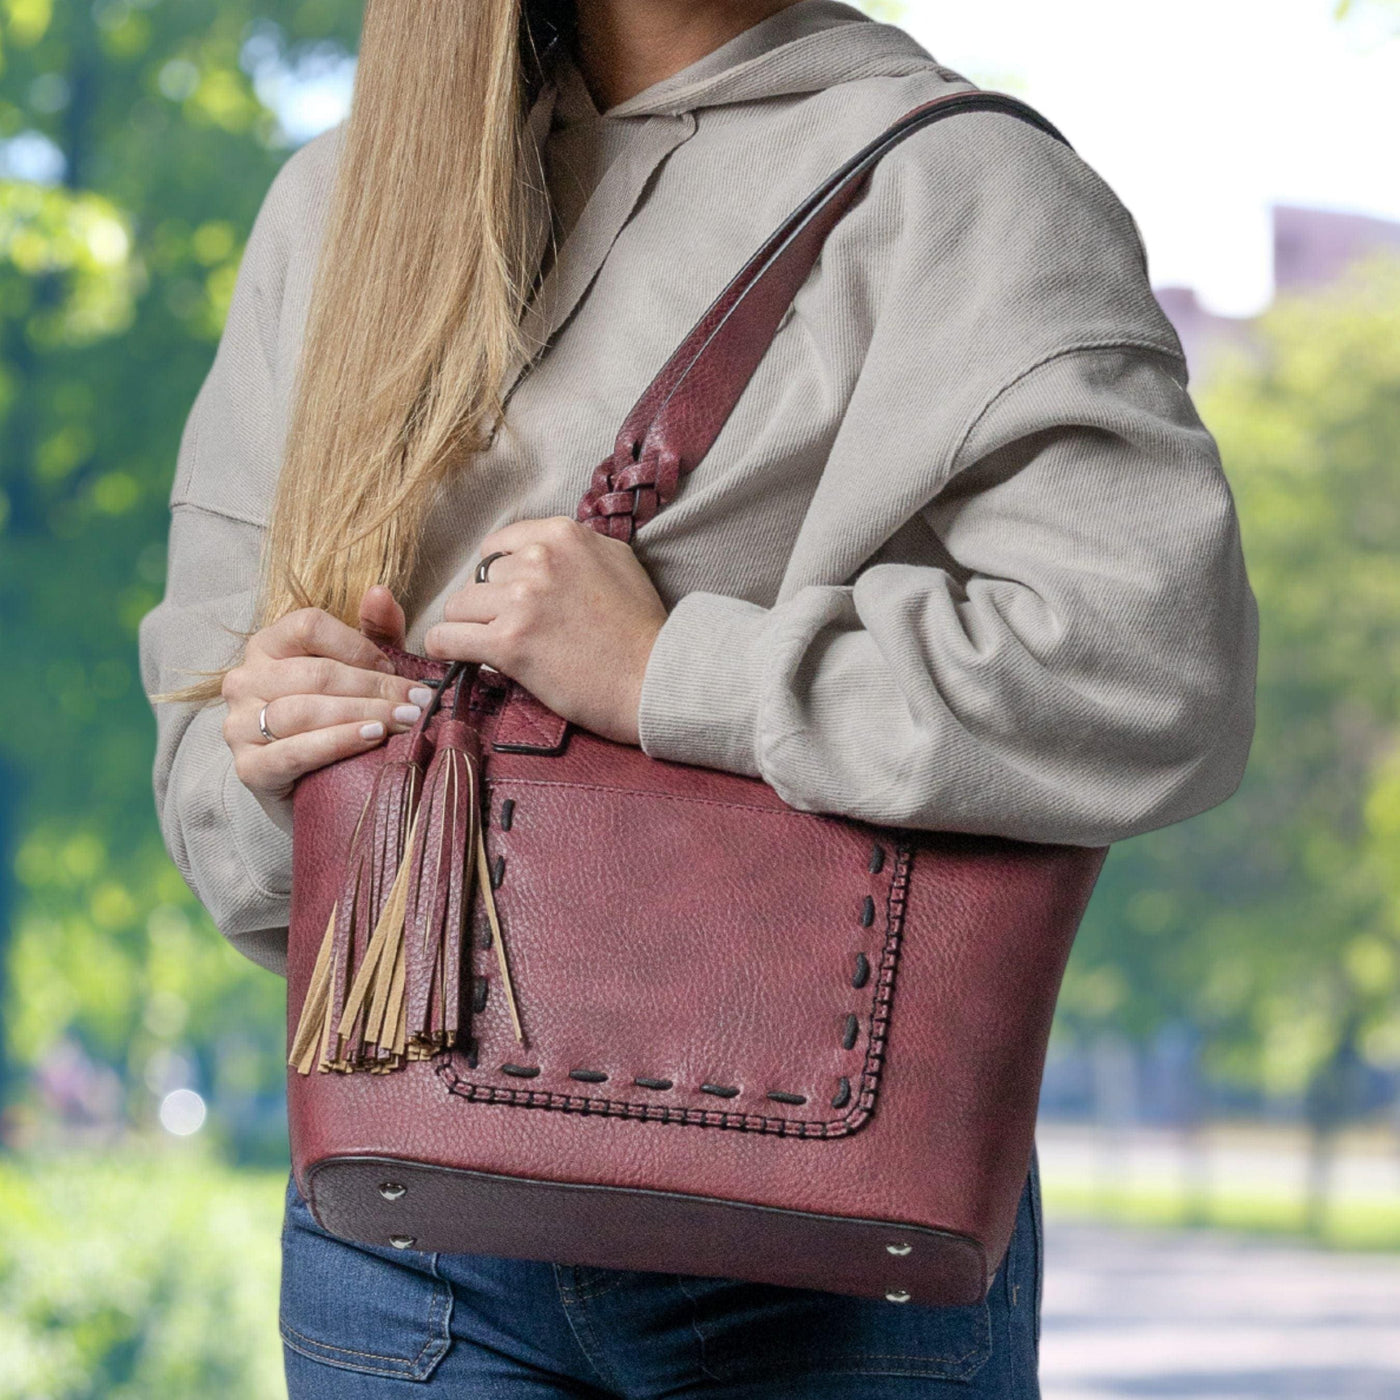 Chic and Functional: Handmade Leather Purses and Concealed Carry Bags - Etsy